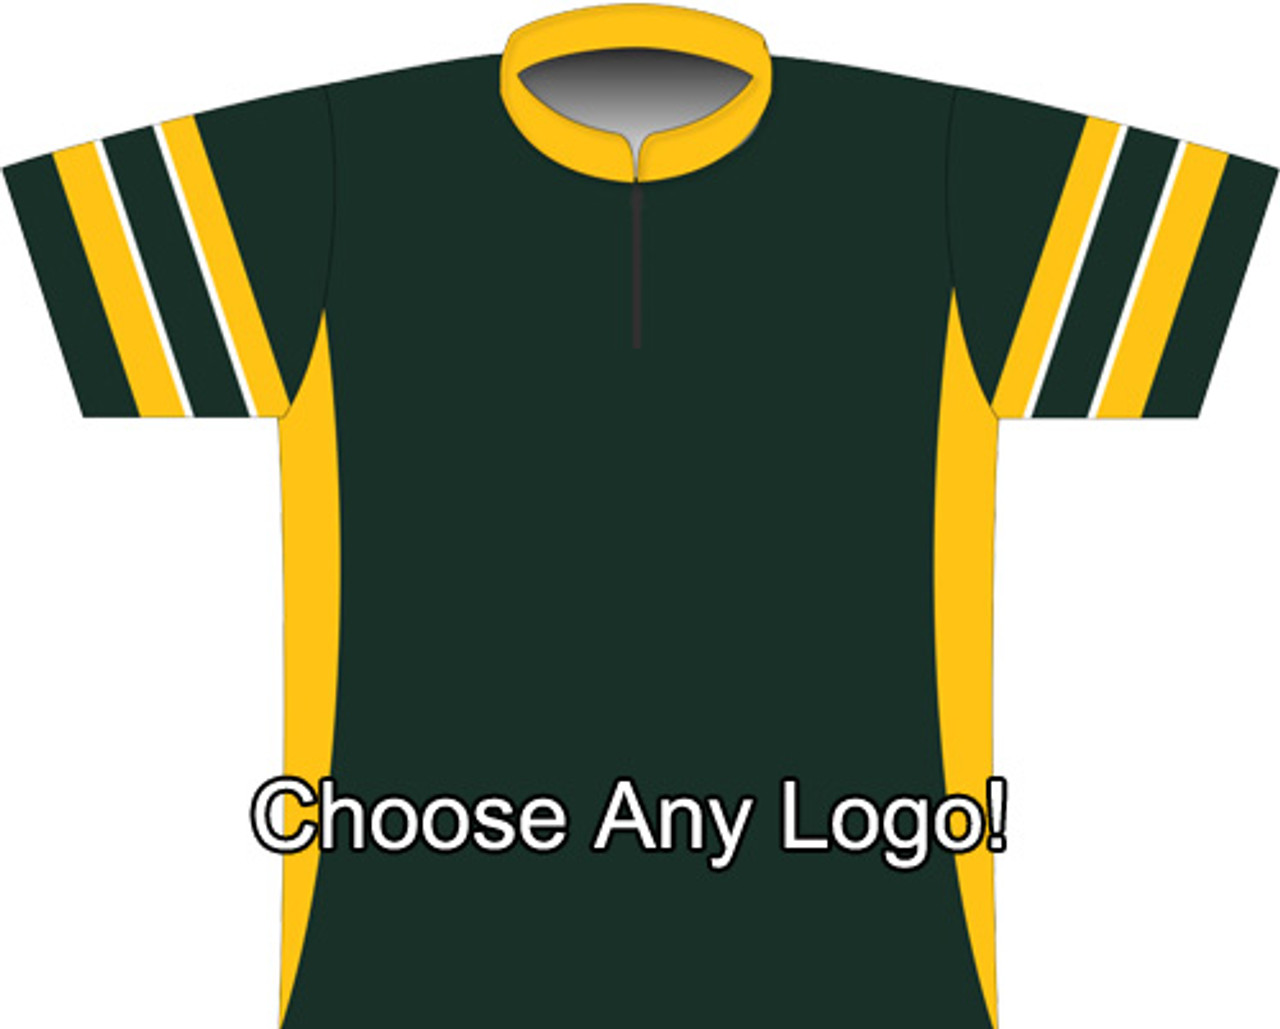 BBR Green Bay Dye Sublimated Jersey FREE SHIPPING 